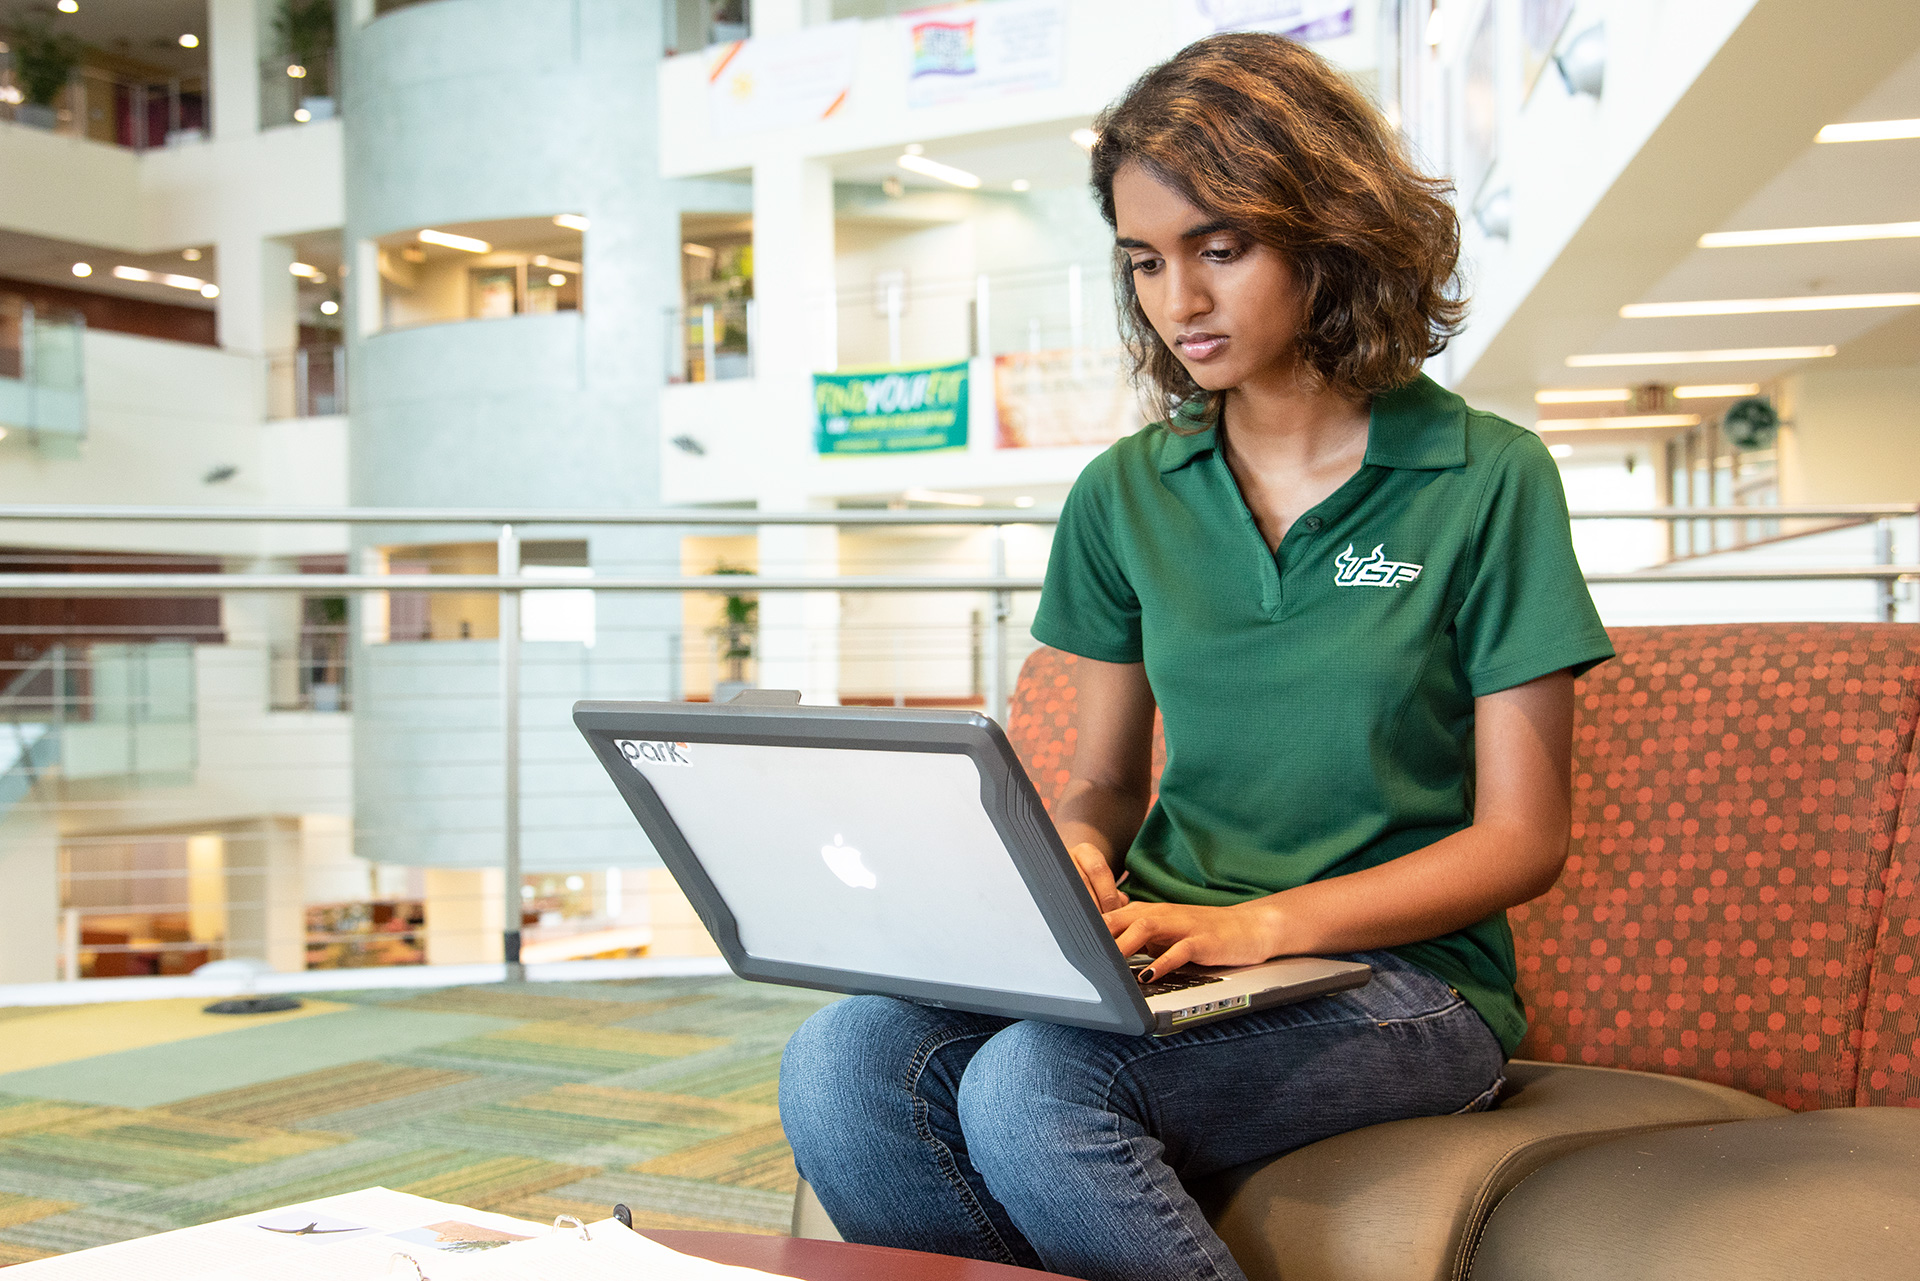 Female USF student looking up USF statistics and tuition information on her laptop.